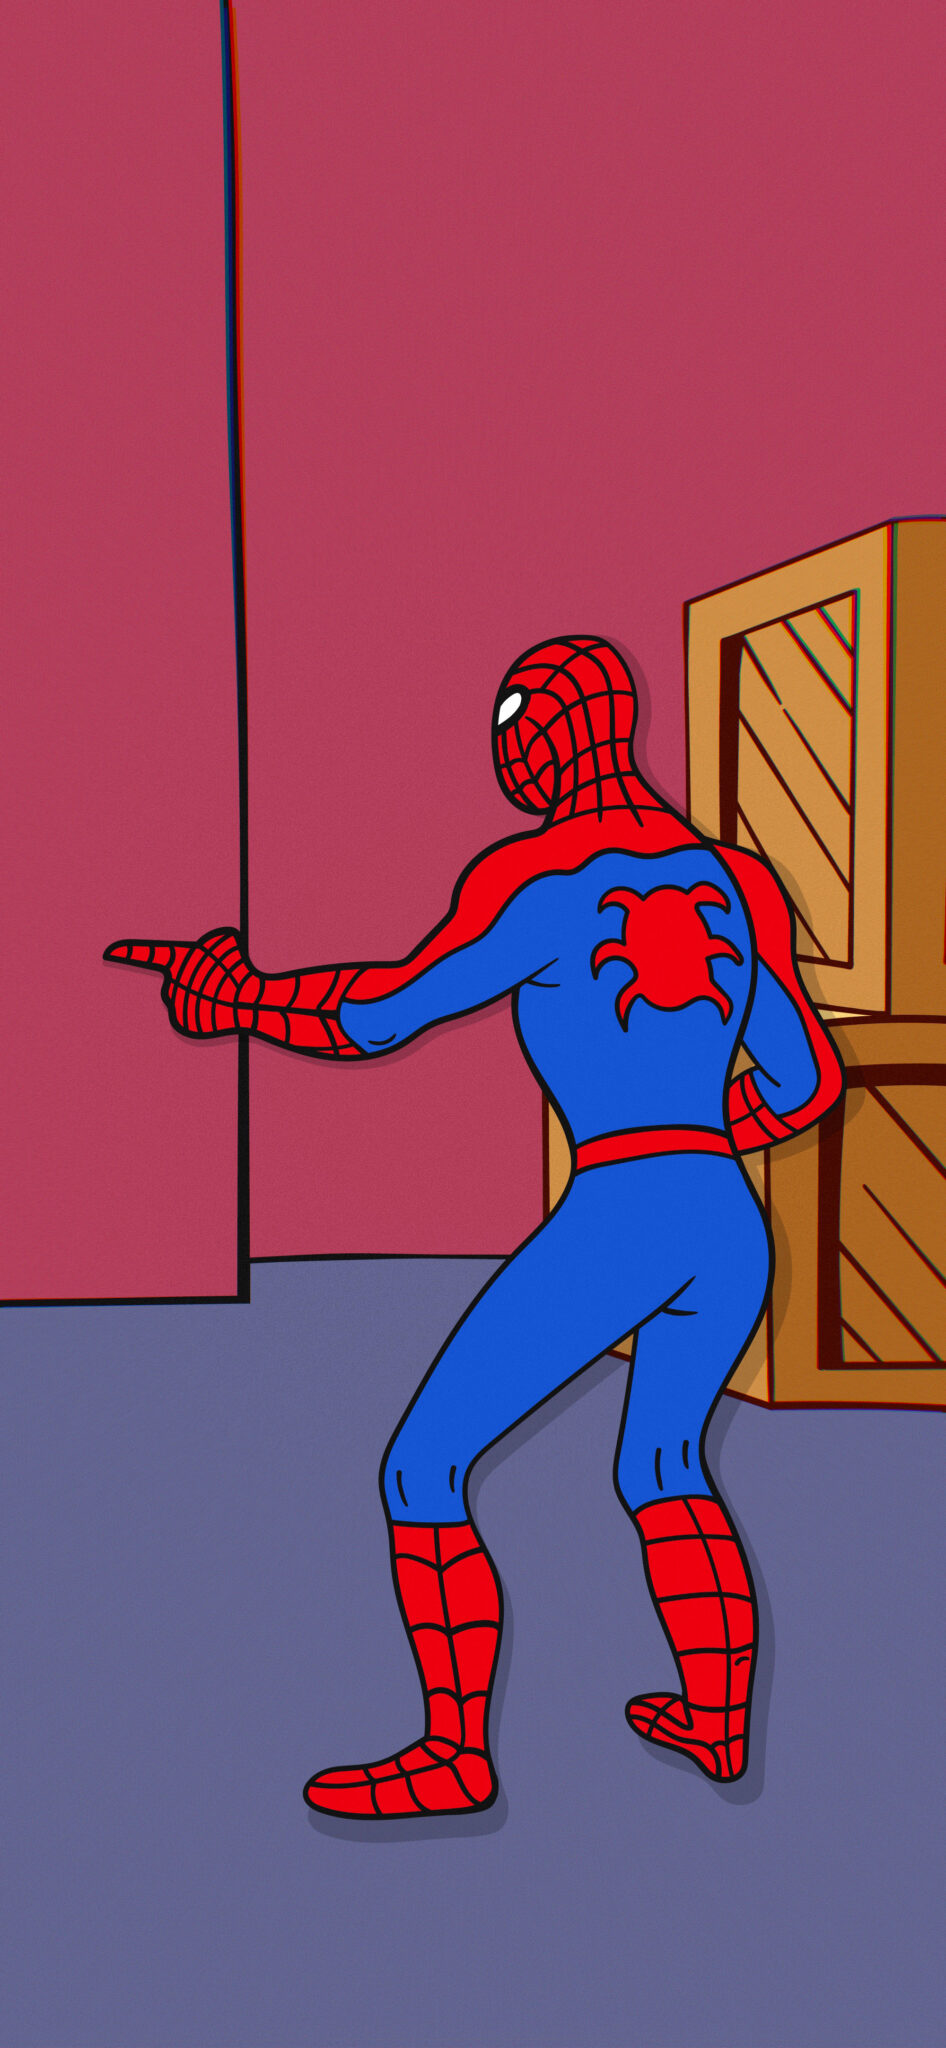 Spider-Man Pointing at Spider-Man Meme Wallpapers - Wallpapers Clan